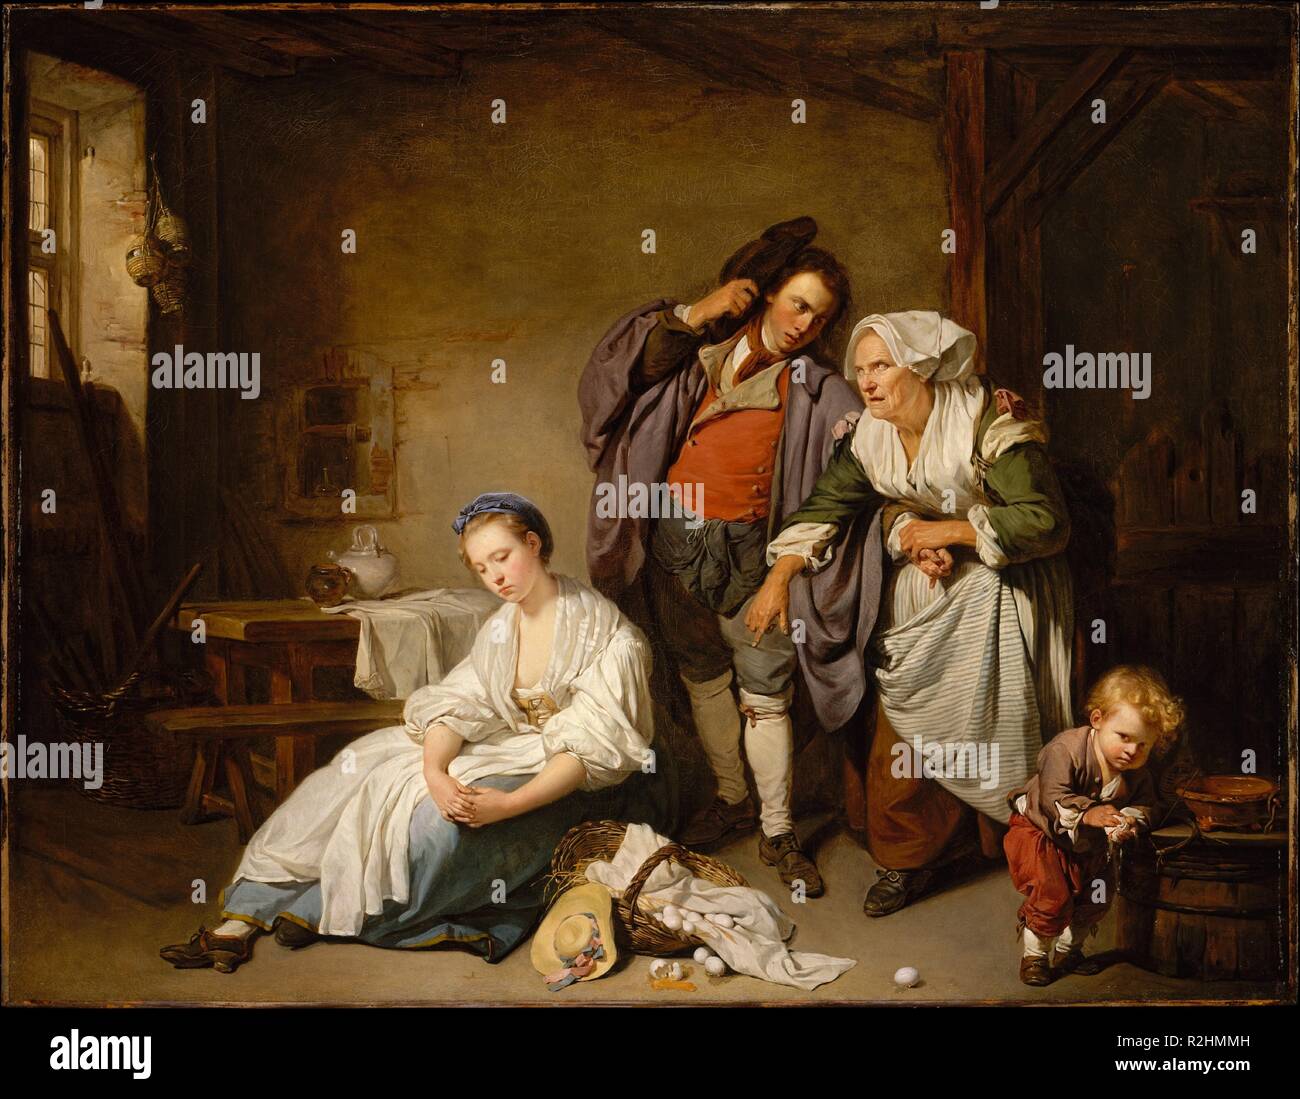 Broken Eggs. Artist: Jean-Baptiste Greuze (French, Tournus 1725-1805 Paris). Dimensions: 28 3/4 x 37 in. (73 x 94 cm). Date: 1756.  <i>Broken Eggs</i> attracted favorable comment when exhibited at the Paris Salon of 1757. One critic noted that the young serving girl had a noble pose worthy of a history painter.  The canvas was painted in Rome, but the principal source may have been a seventeenth-century Dutch work by Frans van Mieris the Elder (State Hermitage Museum, St. Petersburg), which Greuze would have known from an engraving. The broken eggs symbolize the loss of the girl's virginity. M Stock Photo